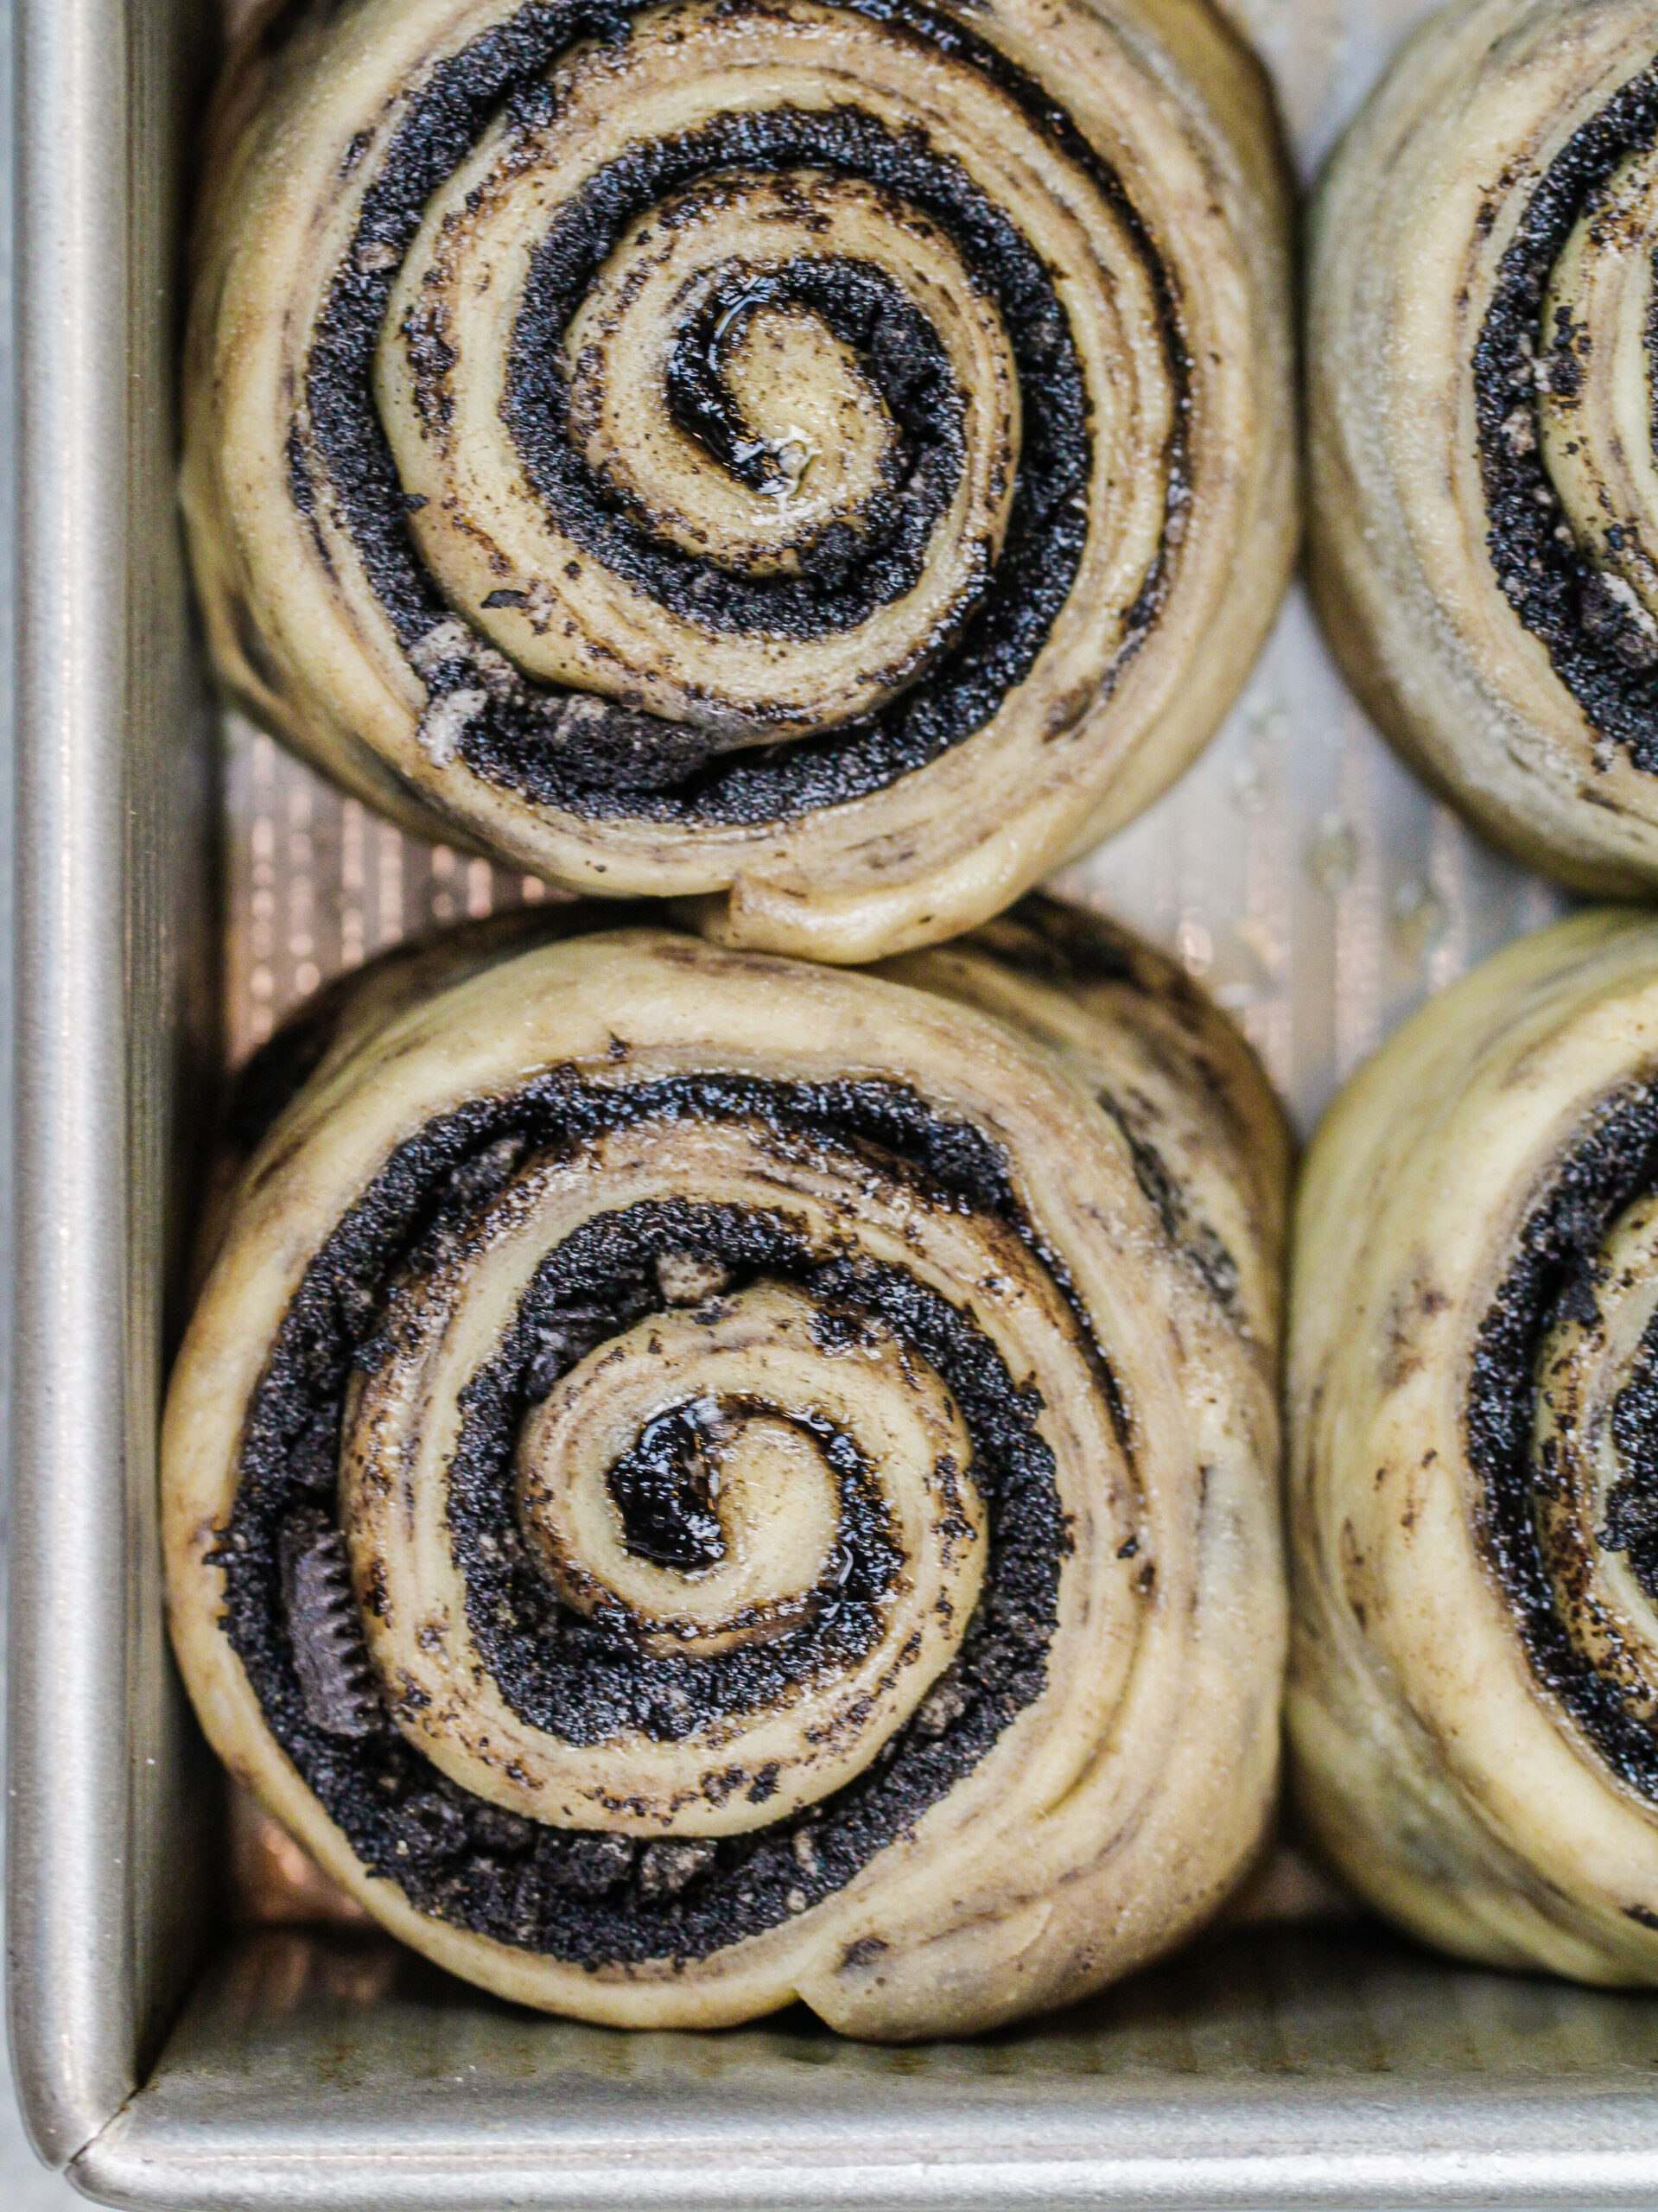 image of cinnamon rolls with dark chocolate filling ready to be baked
